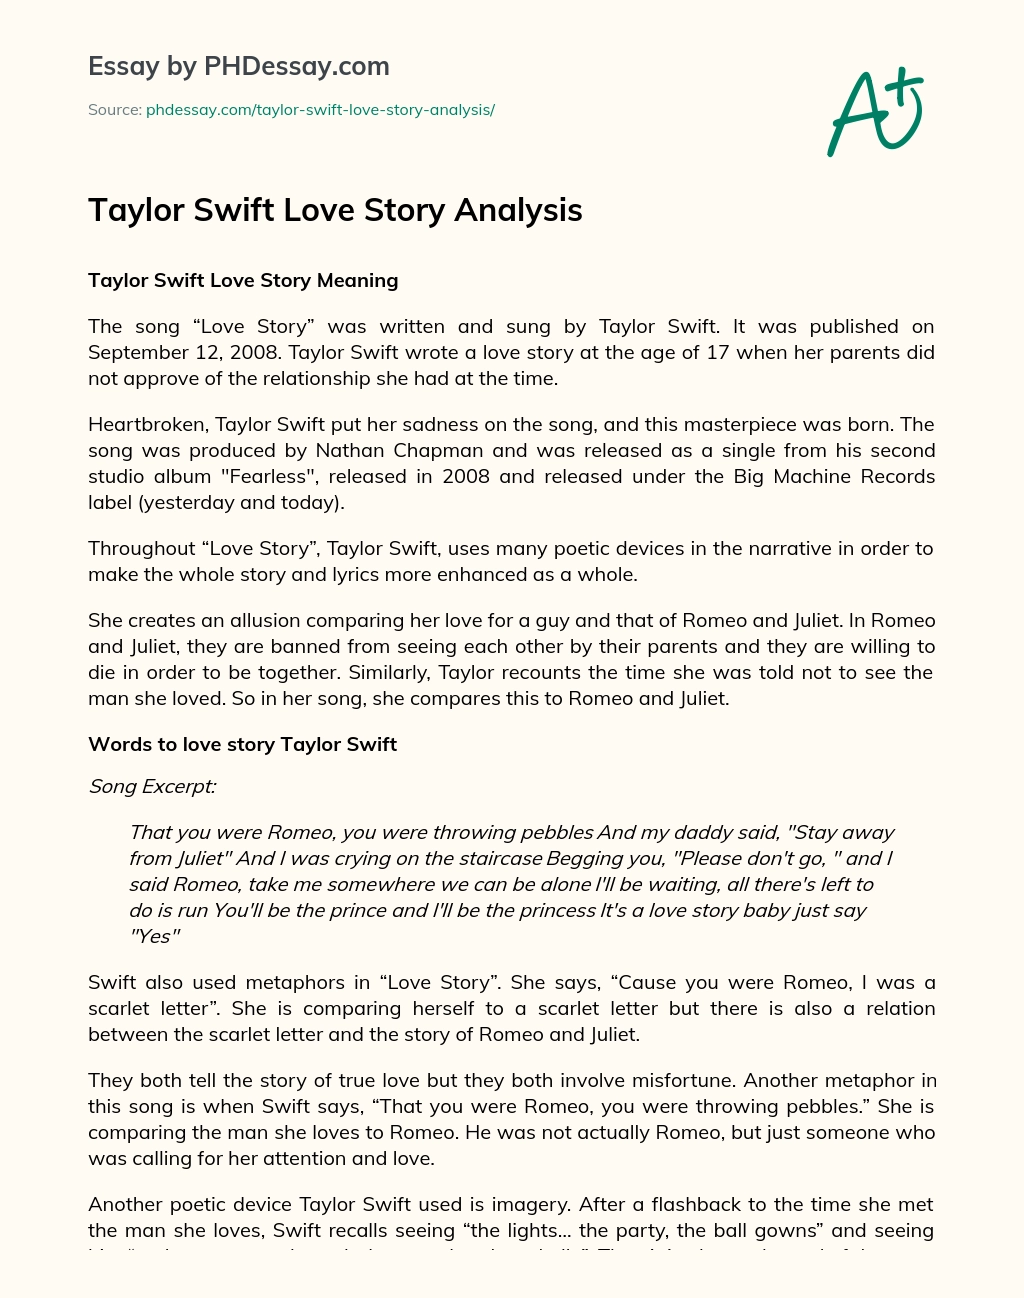 essay topics about taylor swift